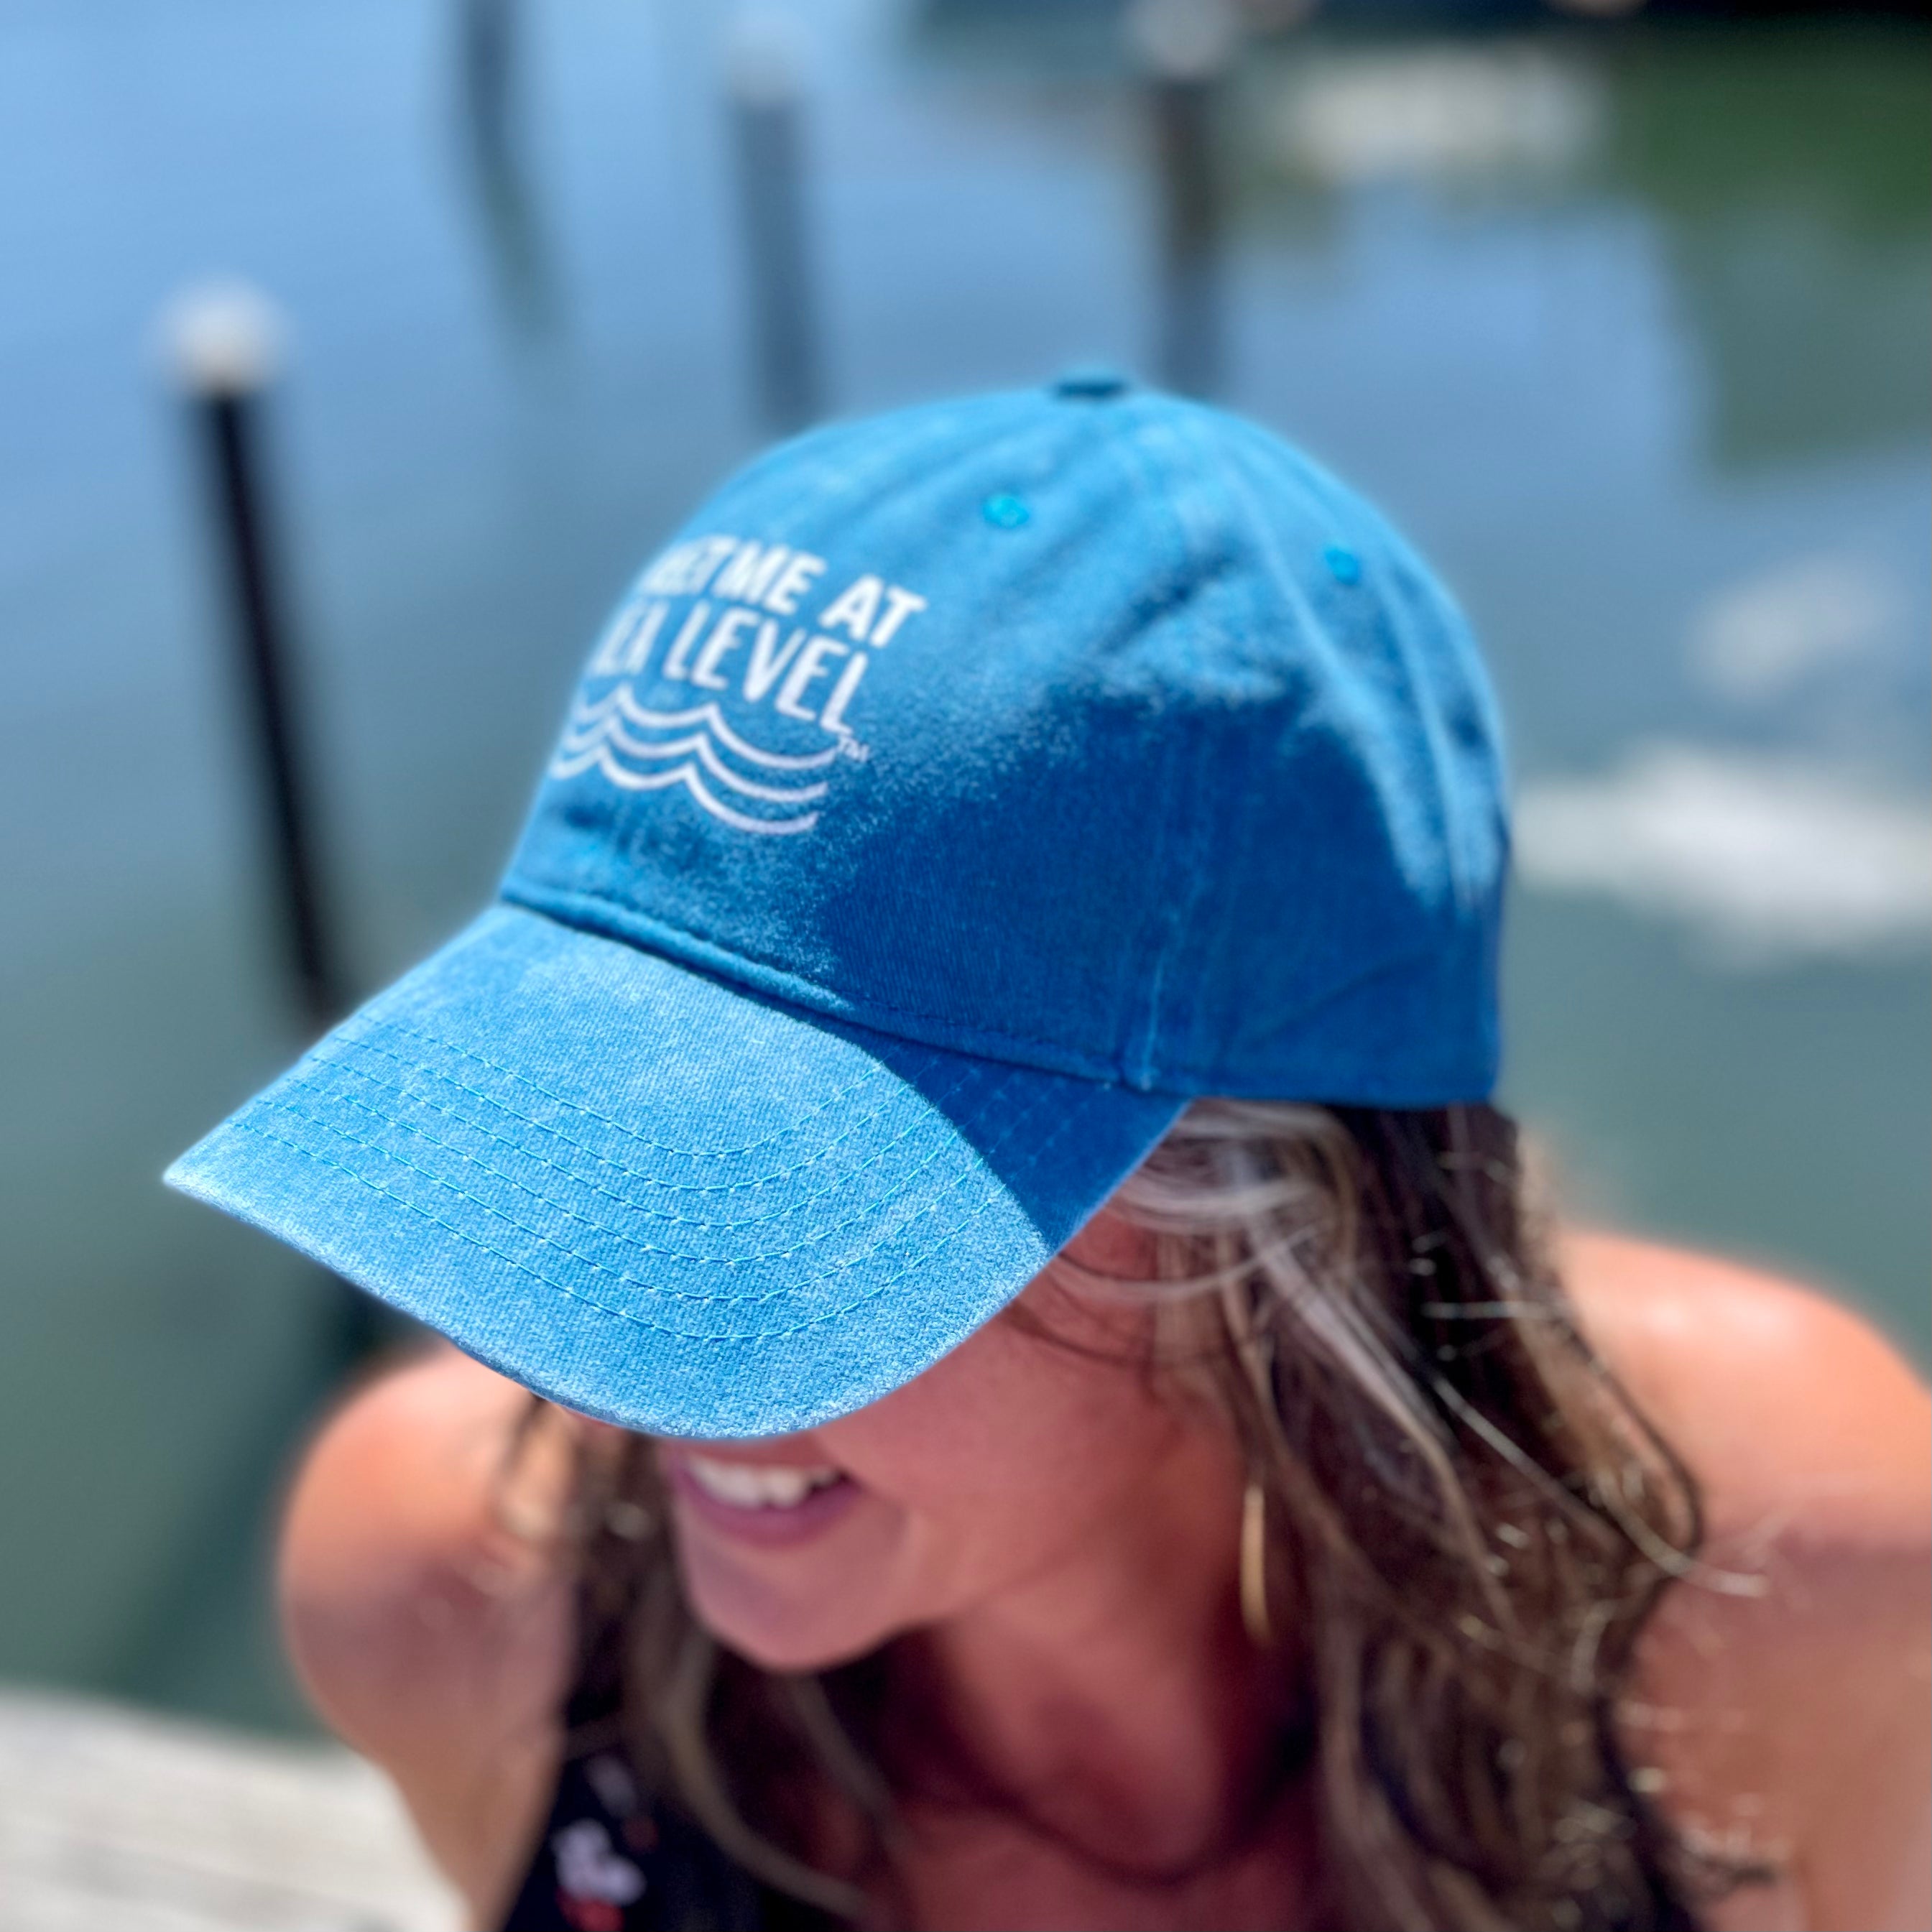 Meet Me At Sea Level Relaxed Cap - printed